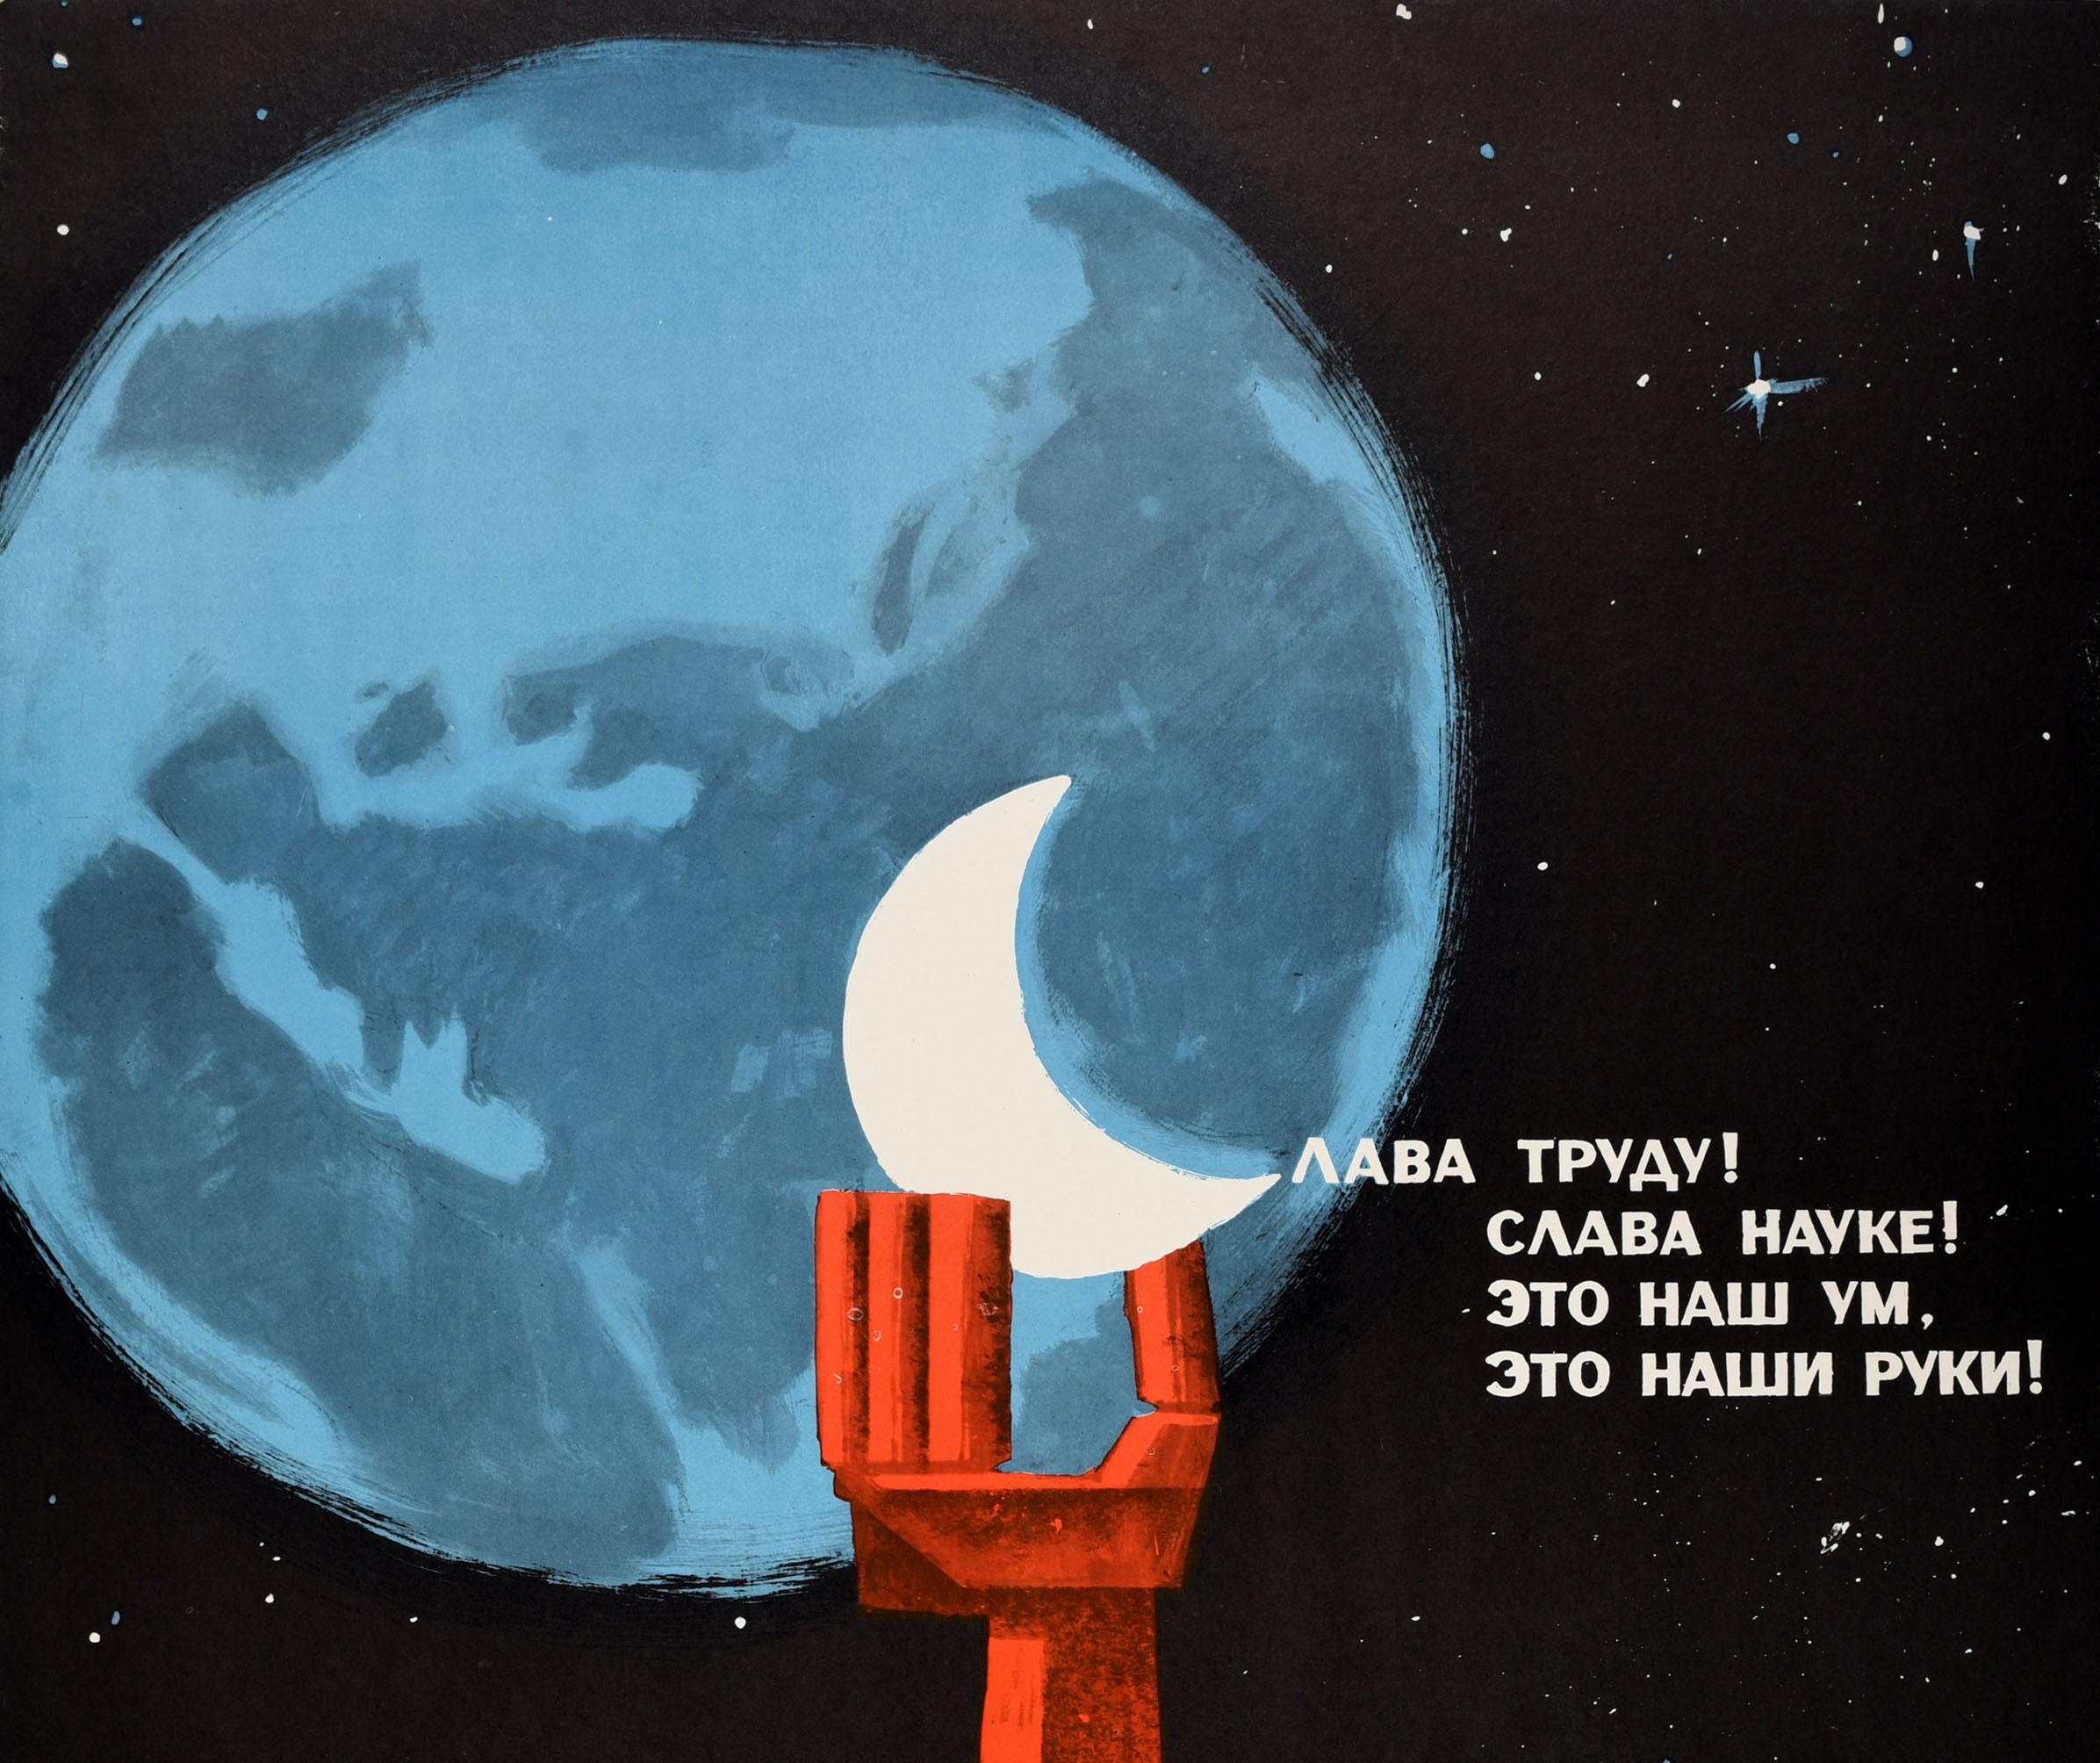 Original vintage Soviet space race era propaganda poster - Glory to Labour! Glory To Science! This is Our Mind, These are our Hands! / ????? ?????! ????? ?????! ??? ??? ??, ??? ???? ????! - featuring a red spacecraft with a robot arm named Luna-16